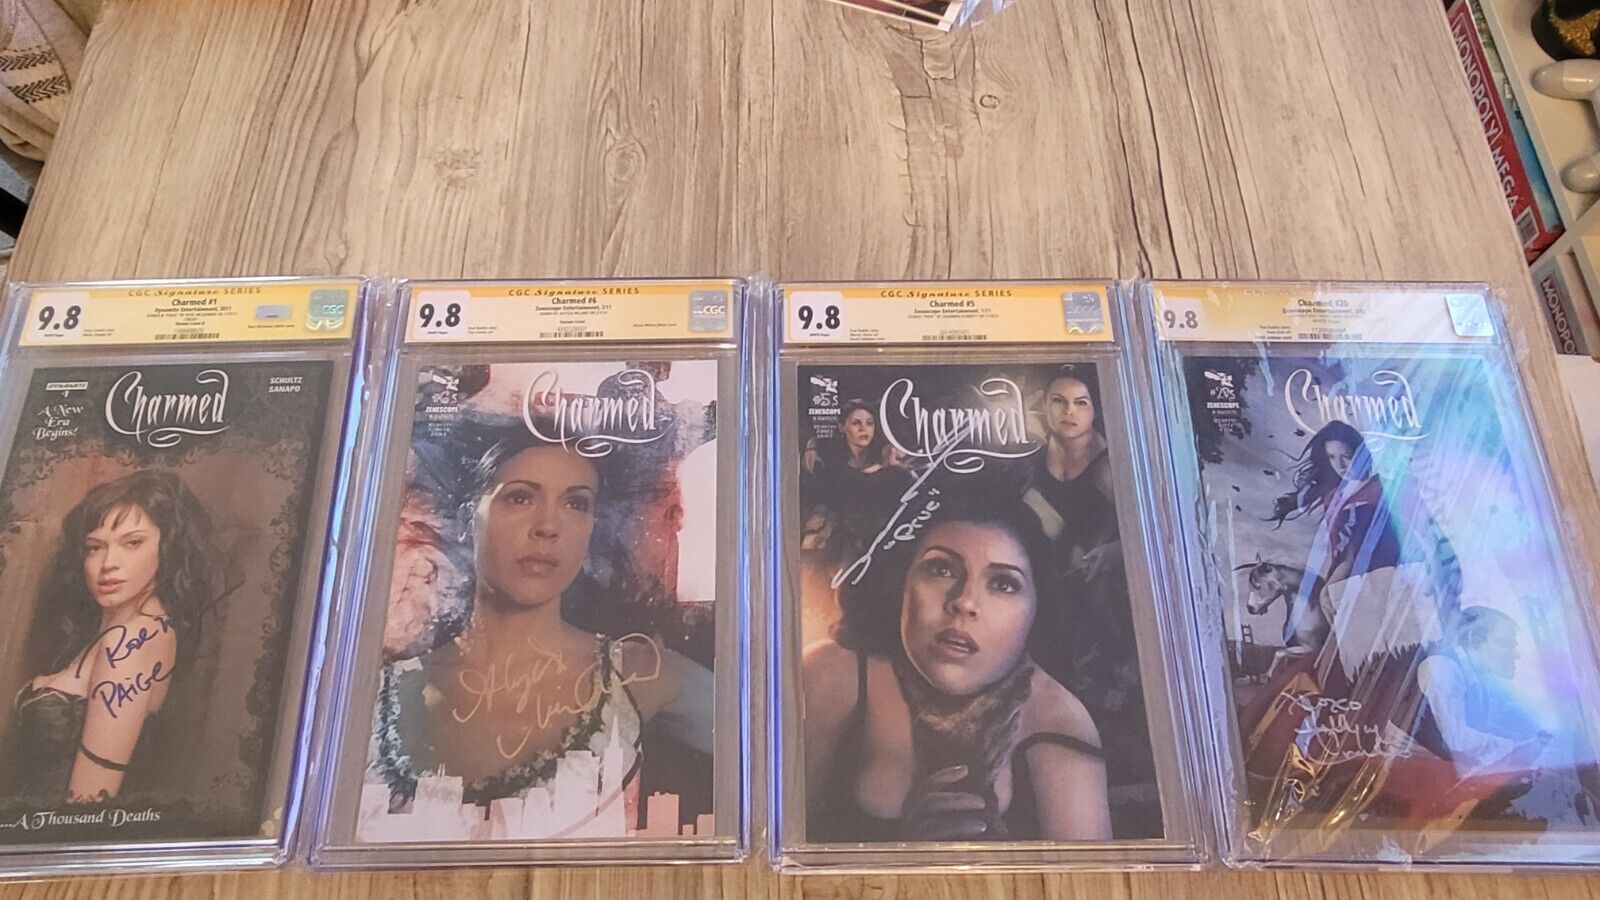 Charmed CGC 9.8 SS Cast Signed Alyssa Milano, Shannen Doherty Rose McGOWAN HOLLY